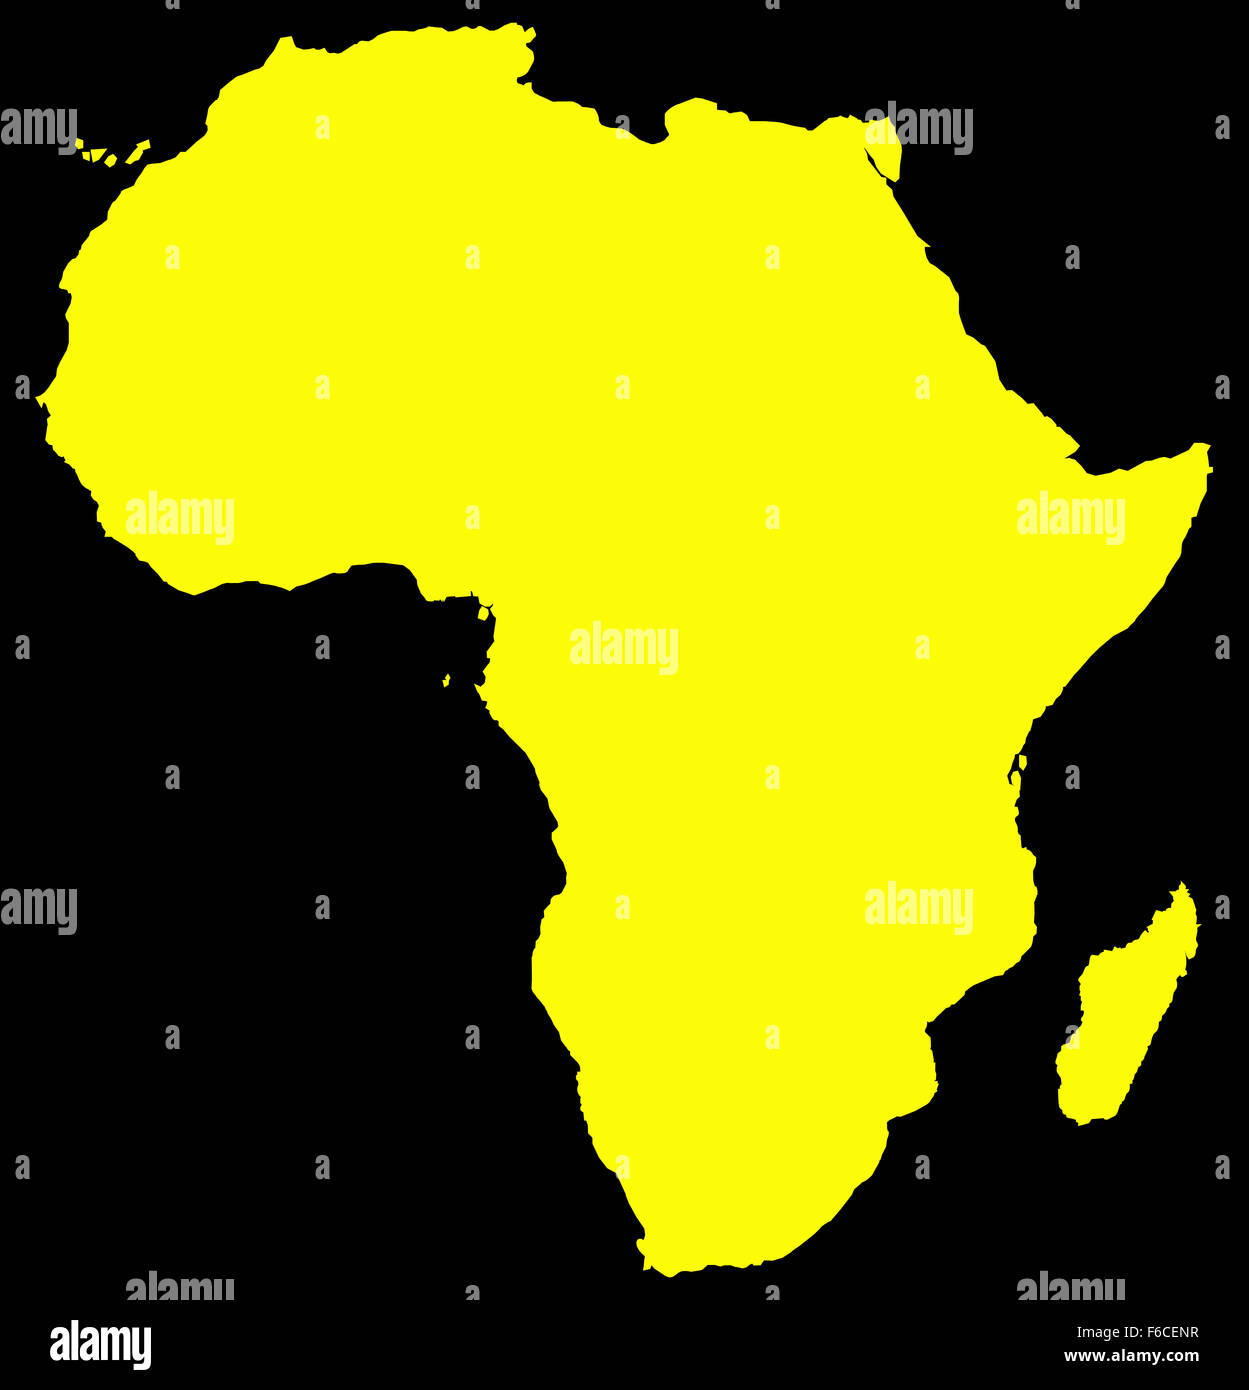 A yellow Africa map isolated on a black background Stock Photo